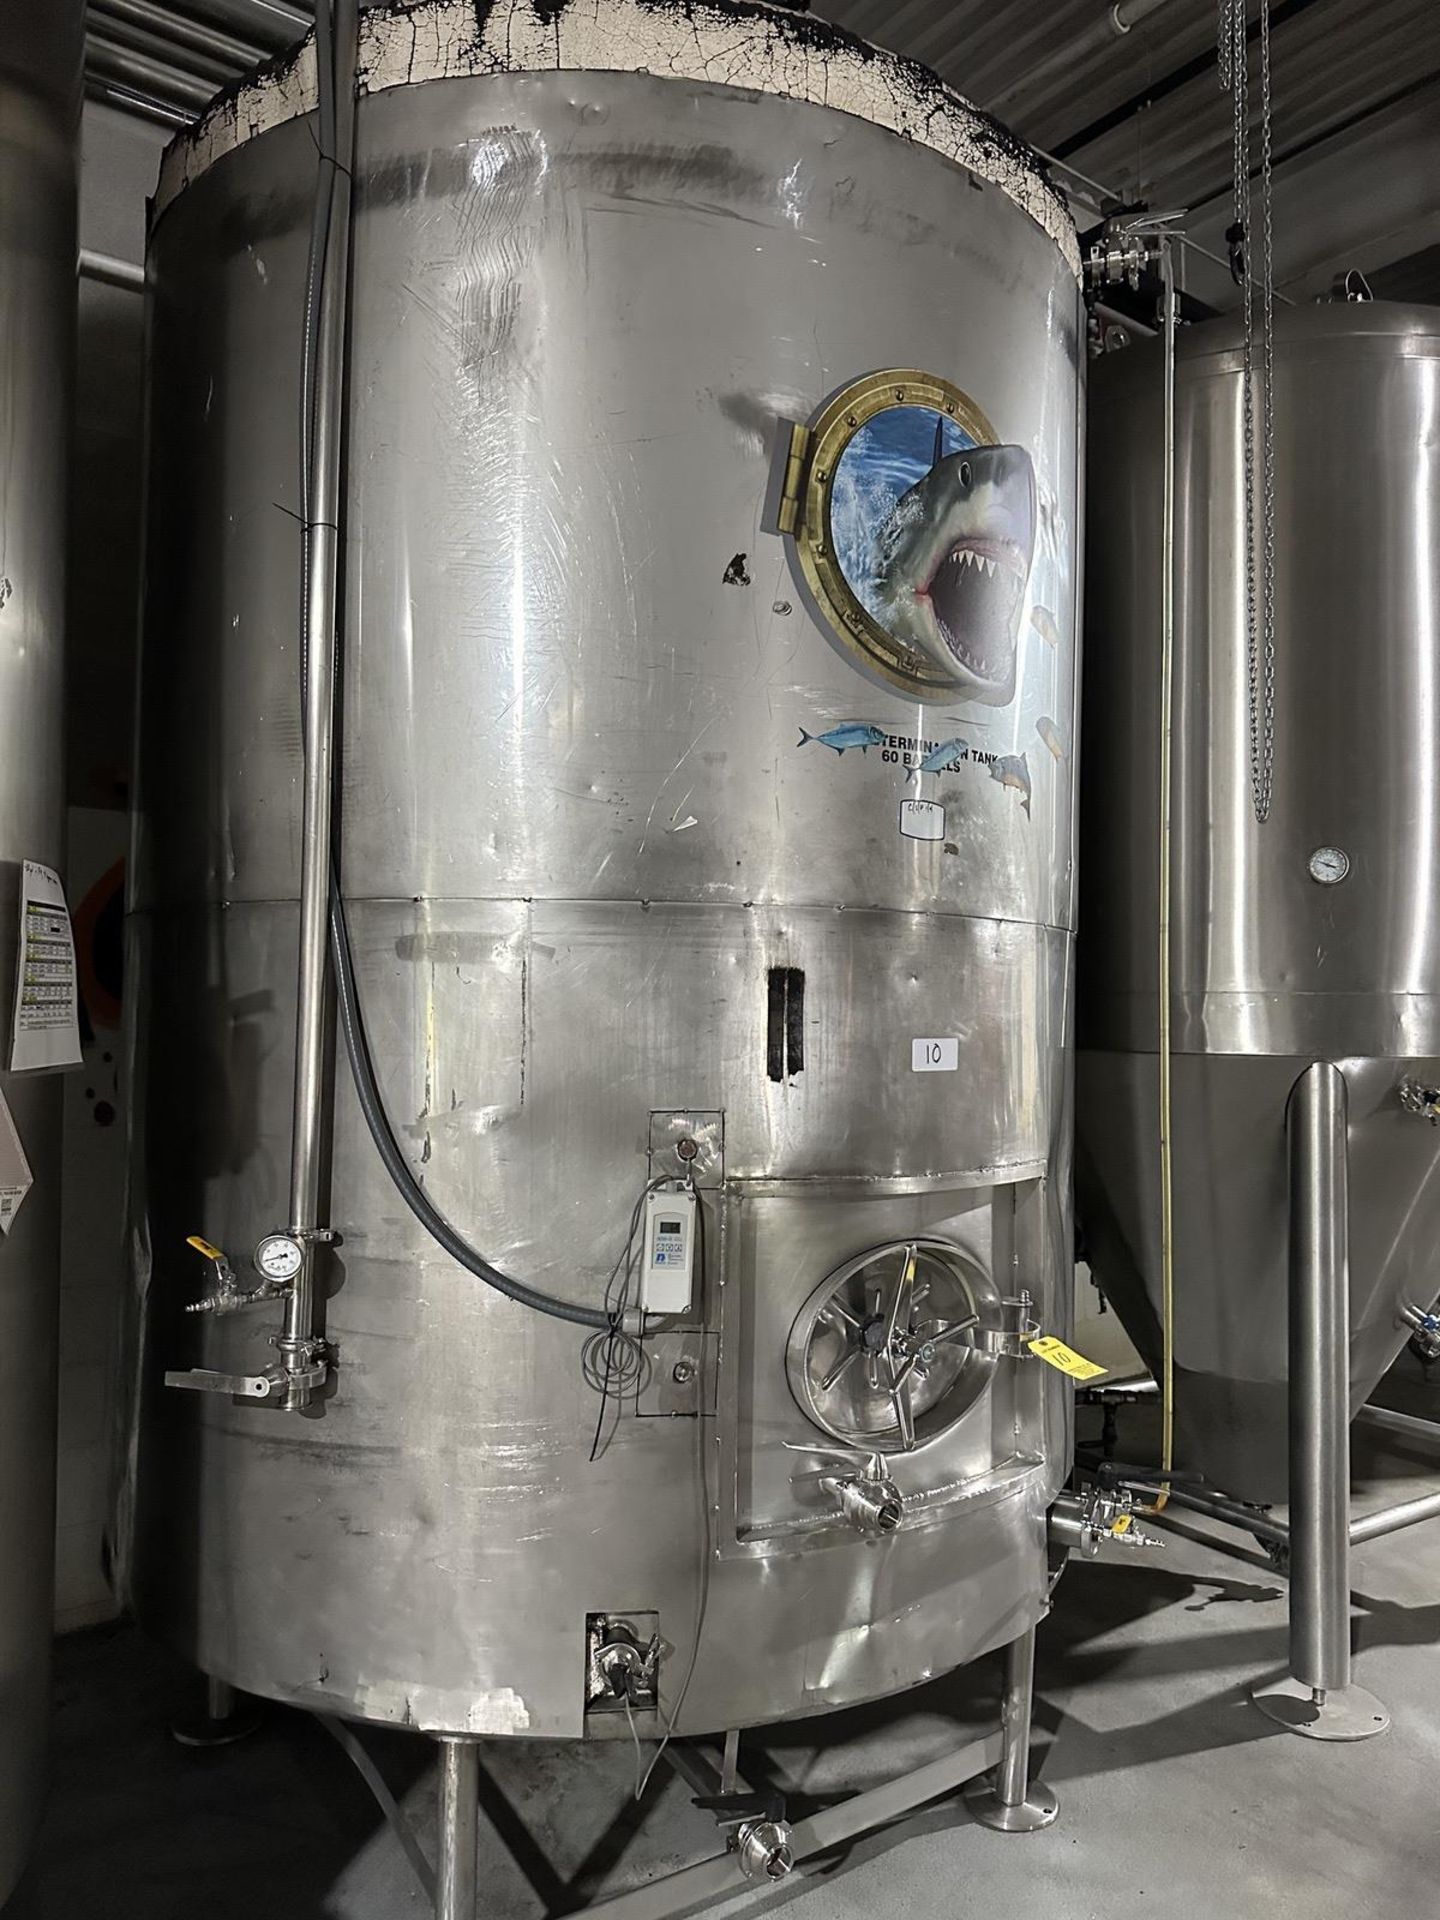 60 BBL Stainless Steel Determination Tank, Glycol Jacketed